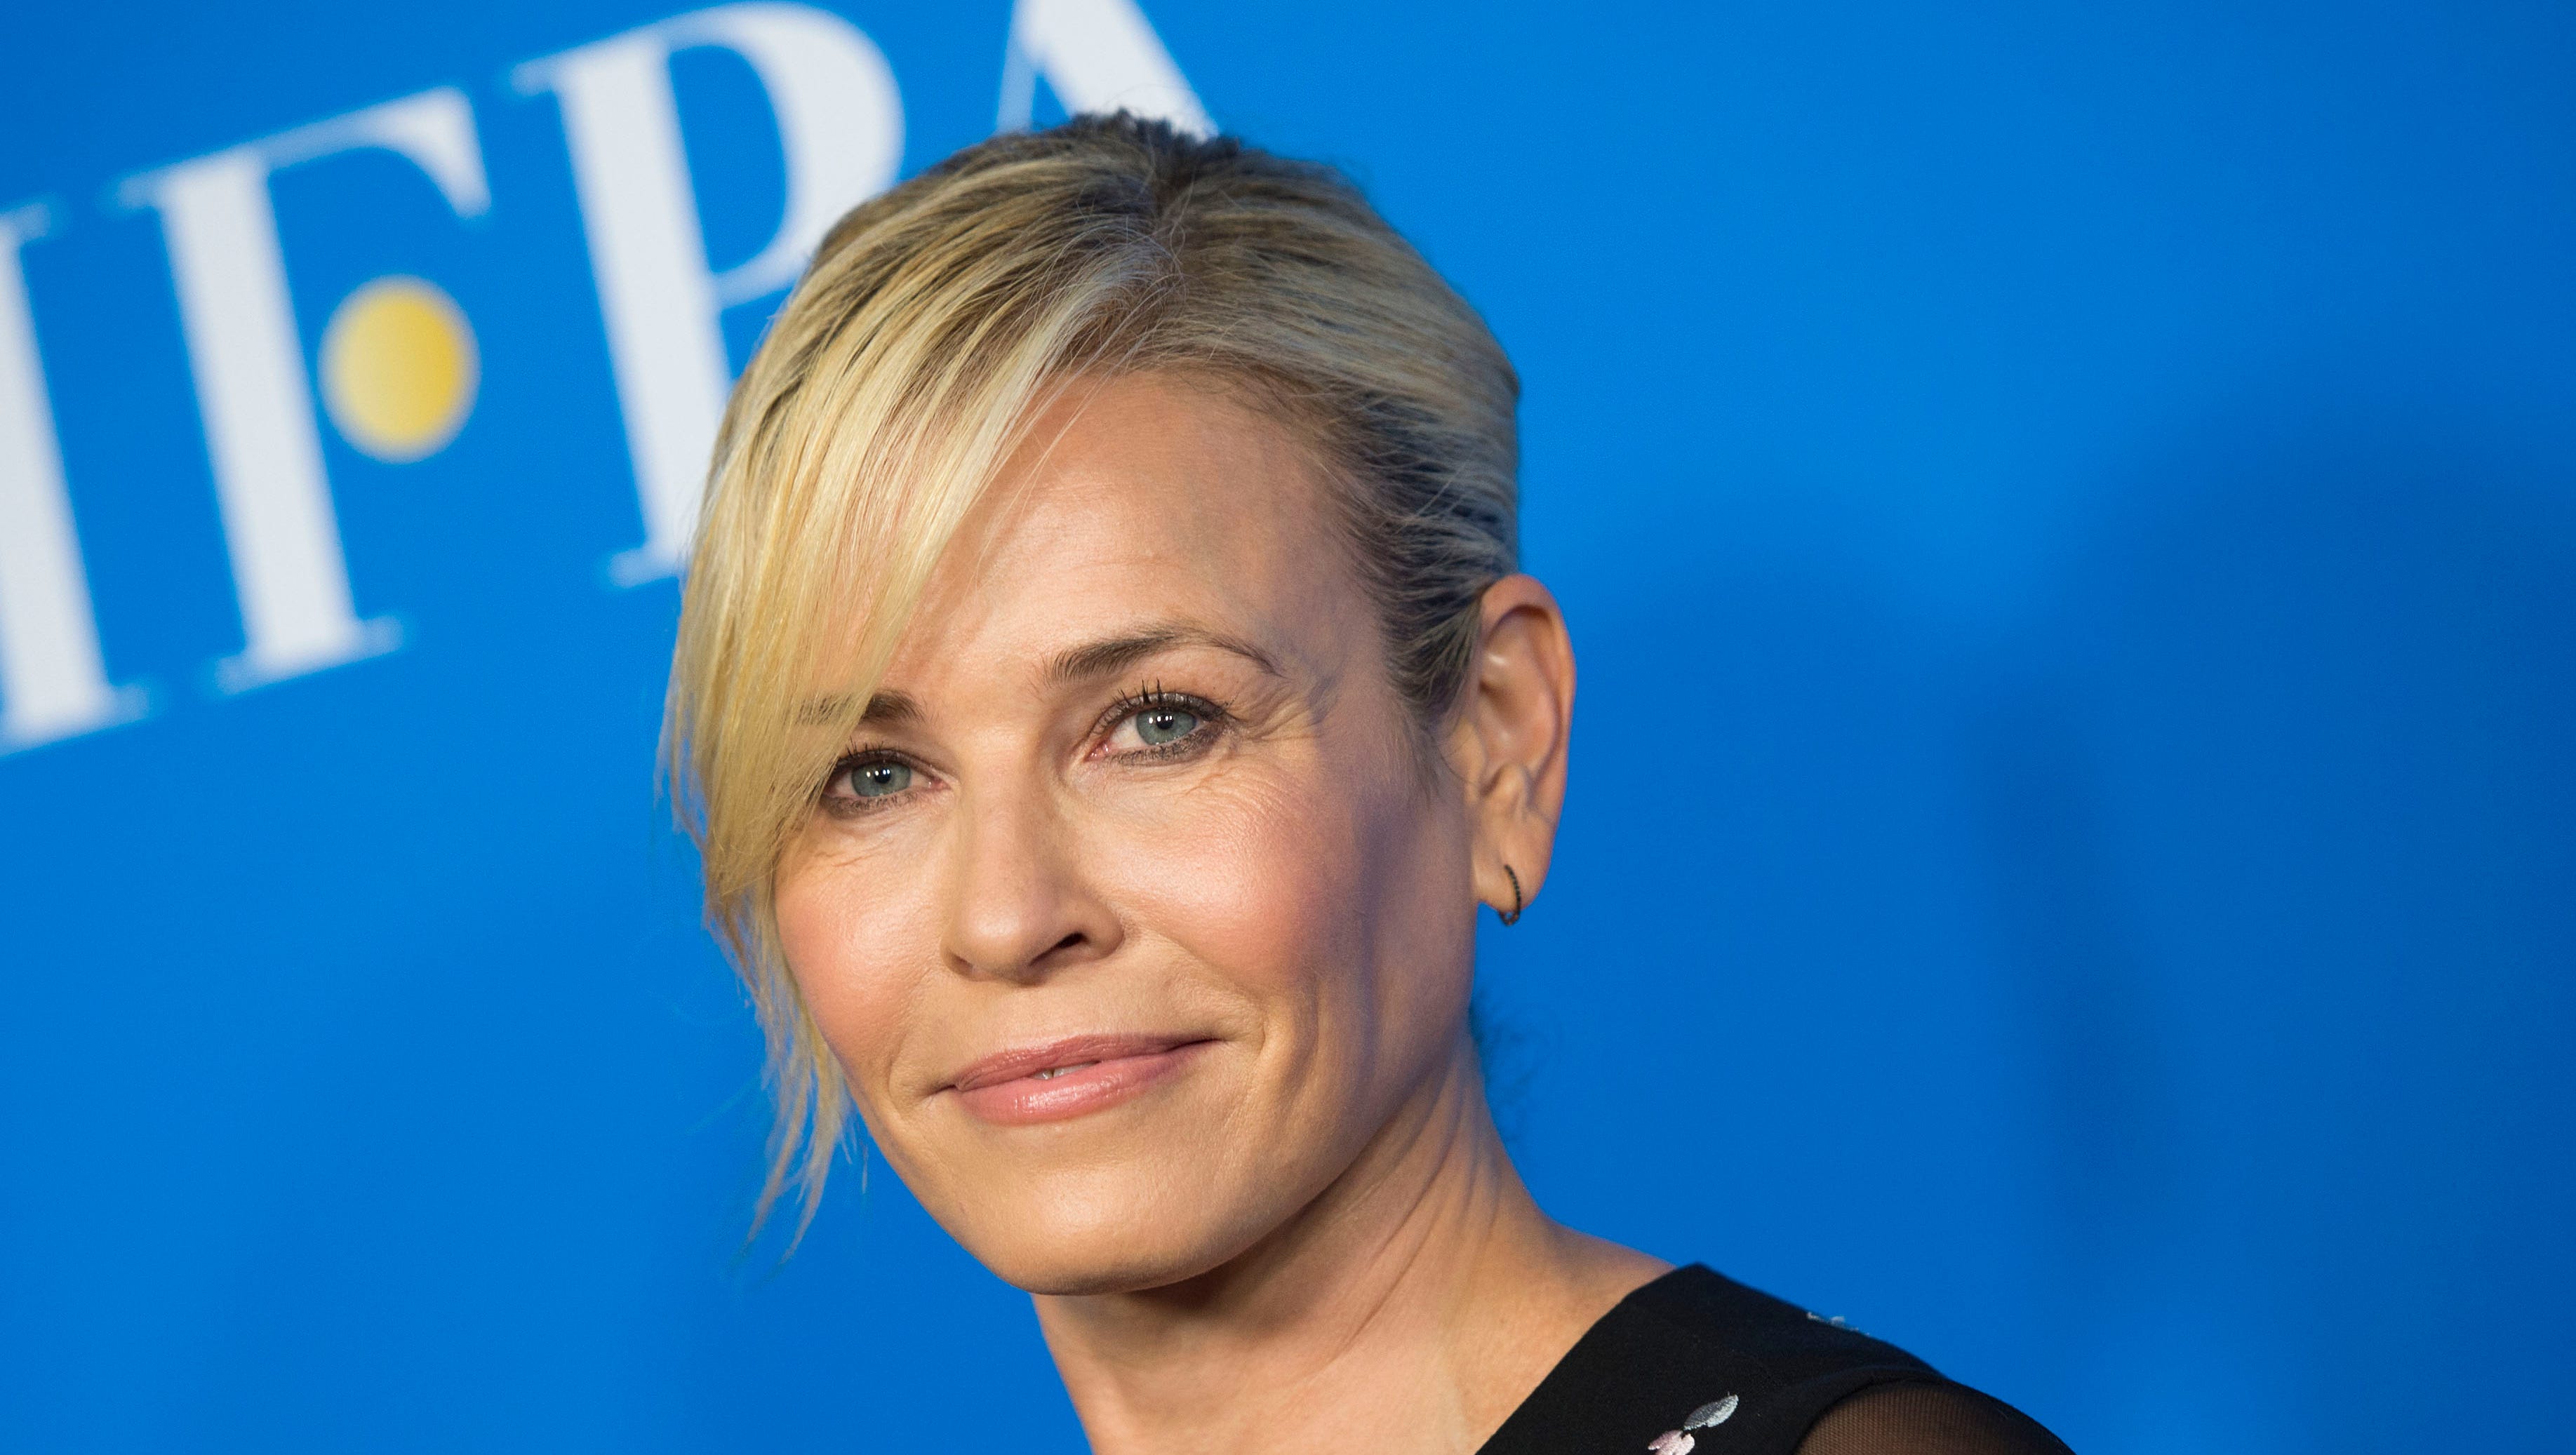 Chelsea Handler Announces Podcast Series Based On Her New Book